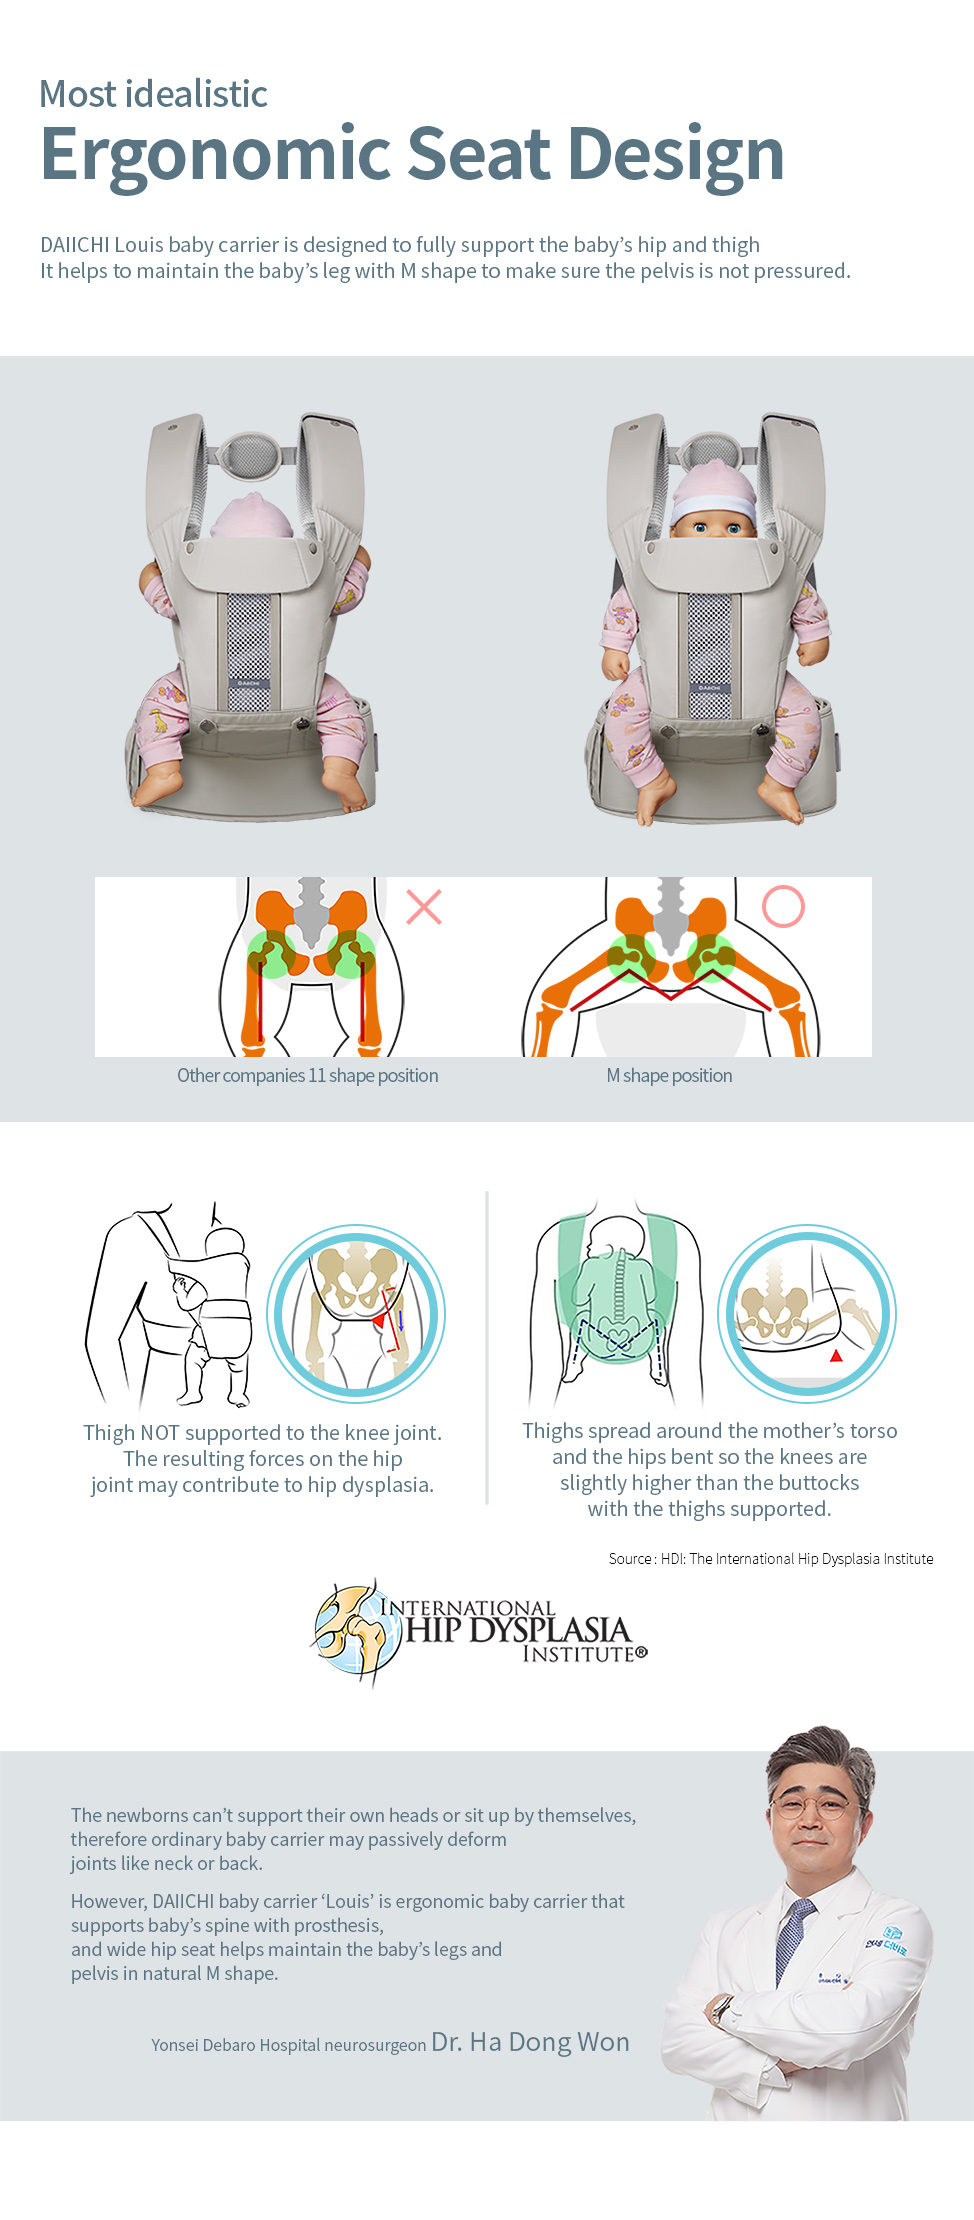 DAIICHI Louis baby carrier is designed to fully support the baby’s hip and thigh. It helps to maintain the baby’s leg with M shape to make sure the pelvis is not pressured.